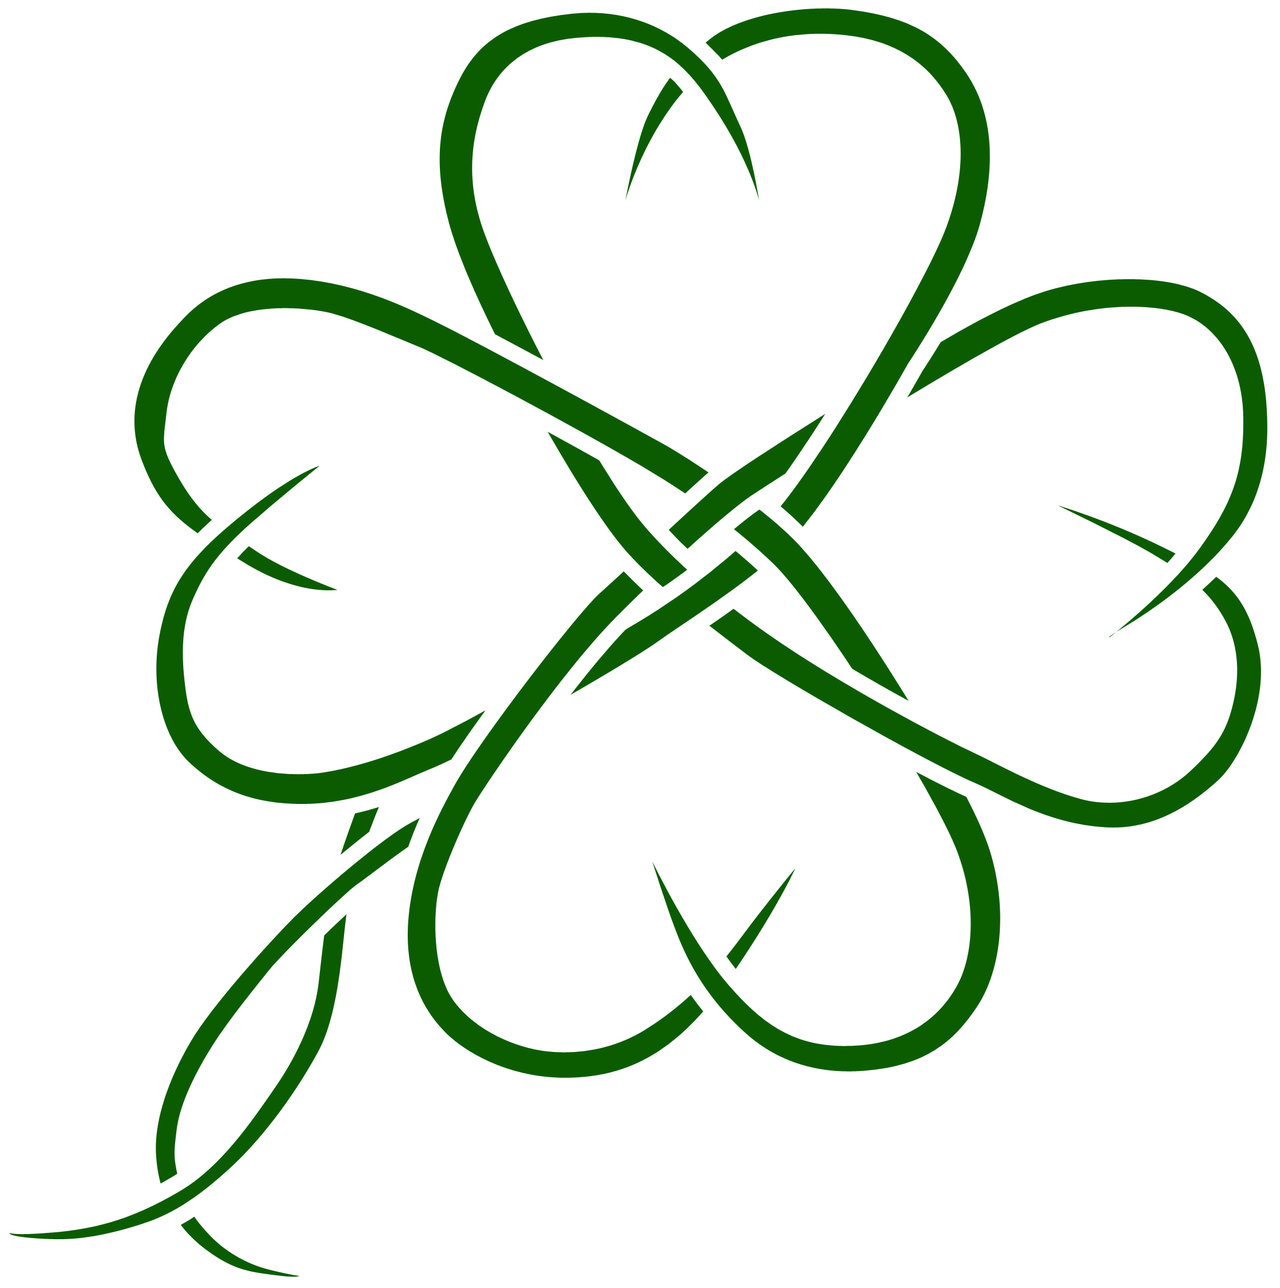 4 Leaf Clover Black And White Clipart